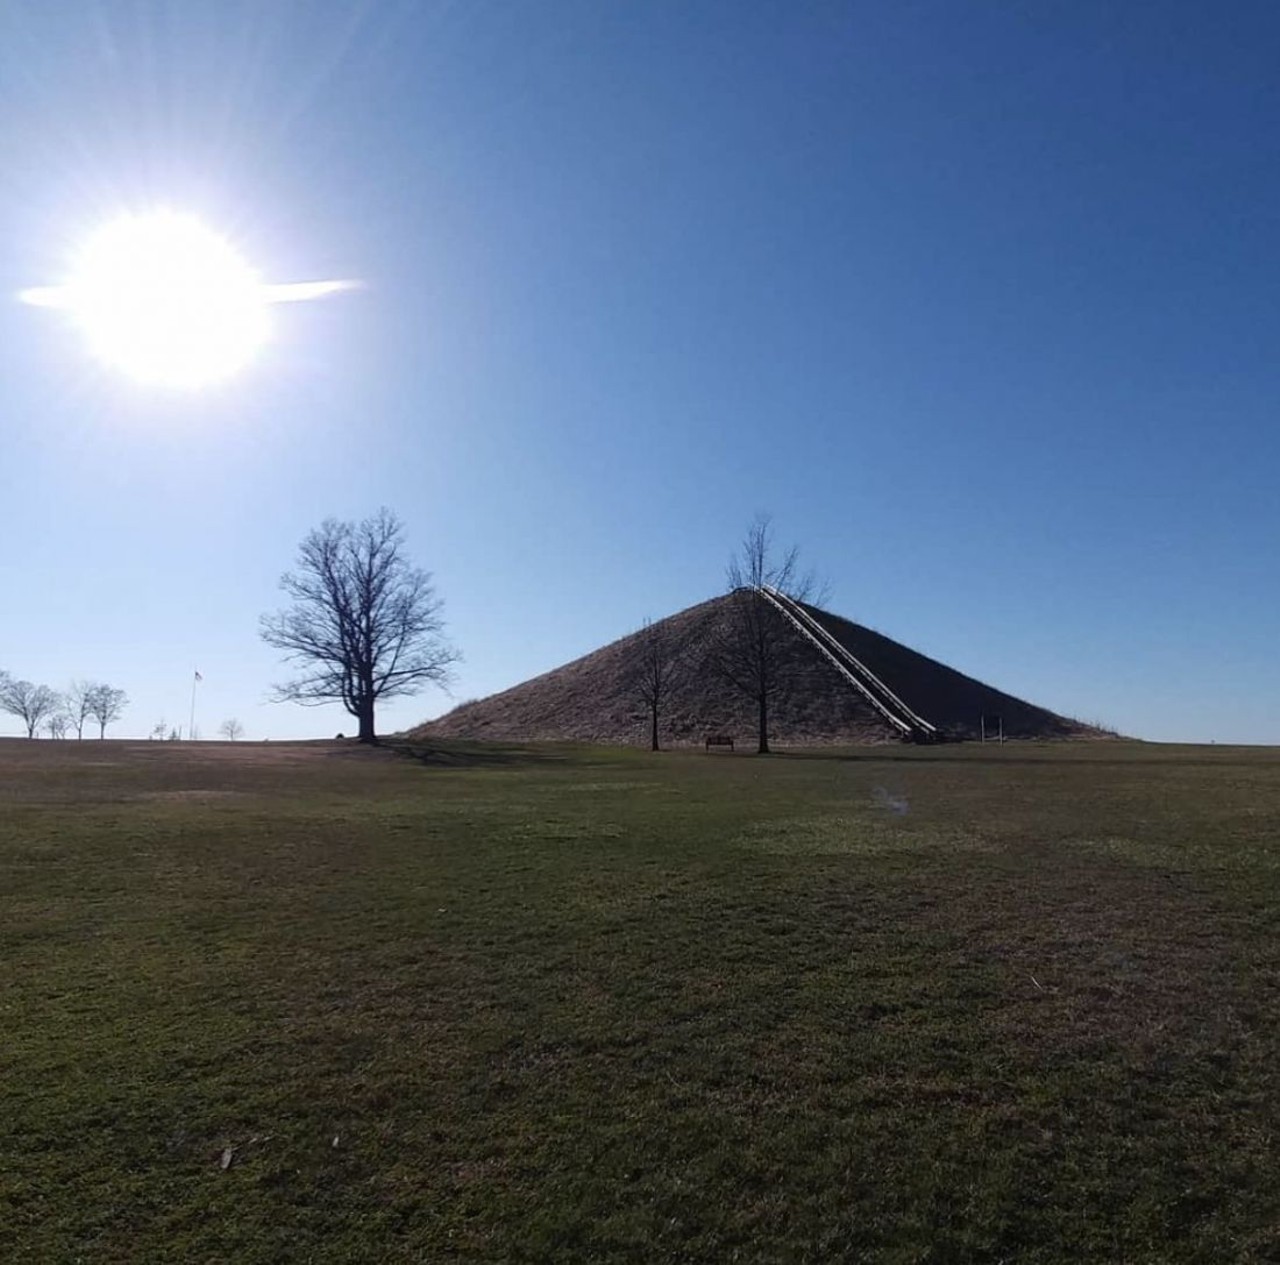  The Miamisburg Mound
Just outside of the Cincinnati, the Miamisburg Mound is one of the two largest conical mounds in eastern North America. Built by the Adena people in what historians best estimates say was around 1000 to 200 BC, the mound was used as a burial ground, but many facts about the mound remain unknown. The mound is 65-feet-tall and 800-feet-wide.
Photo via @CallieVZ/Instagram